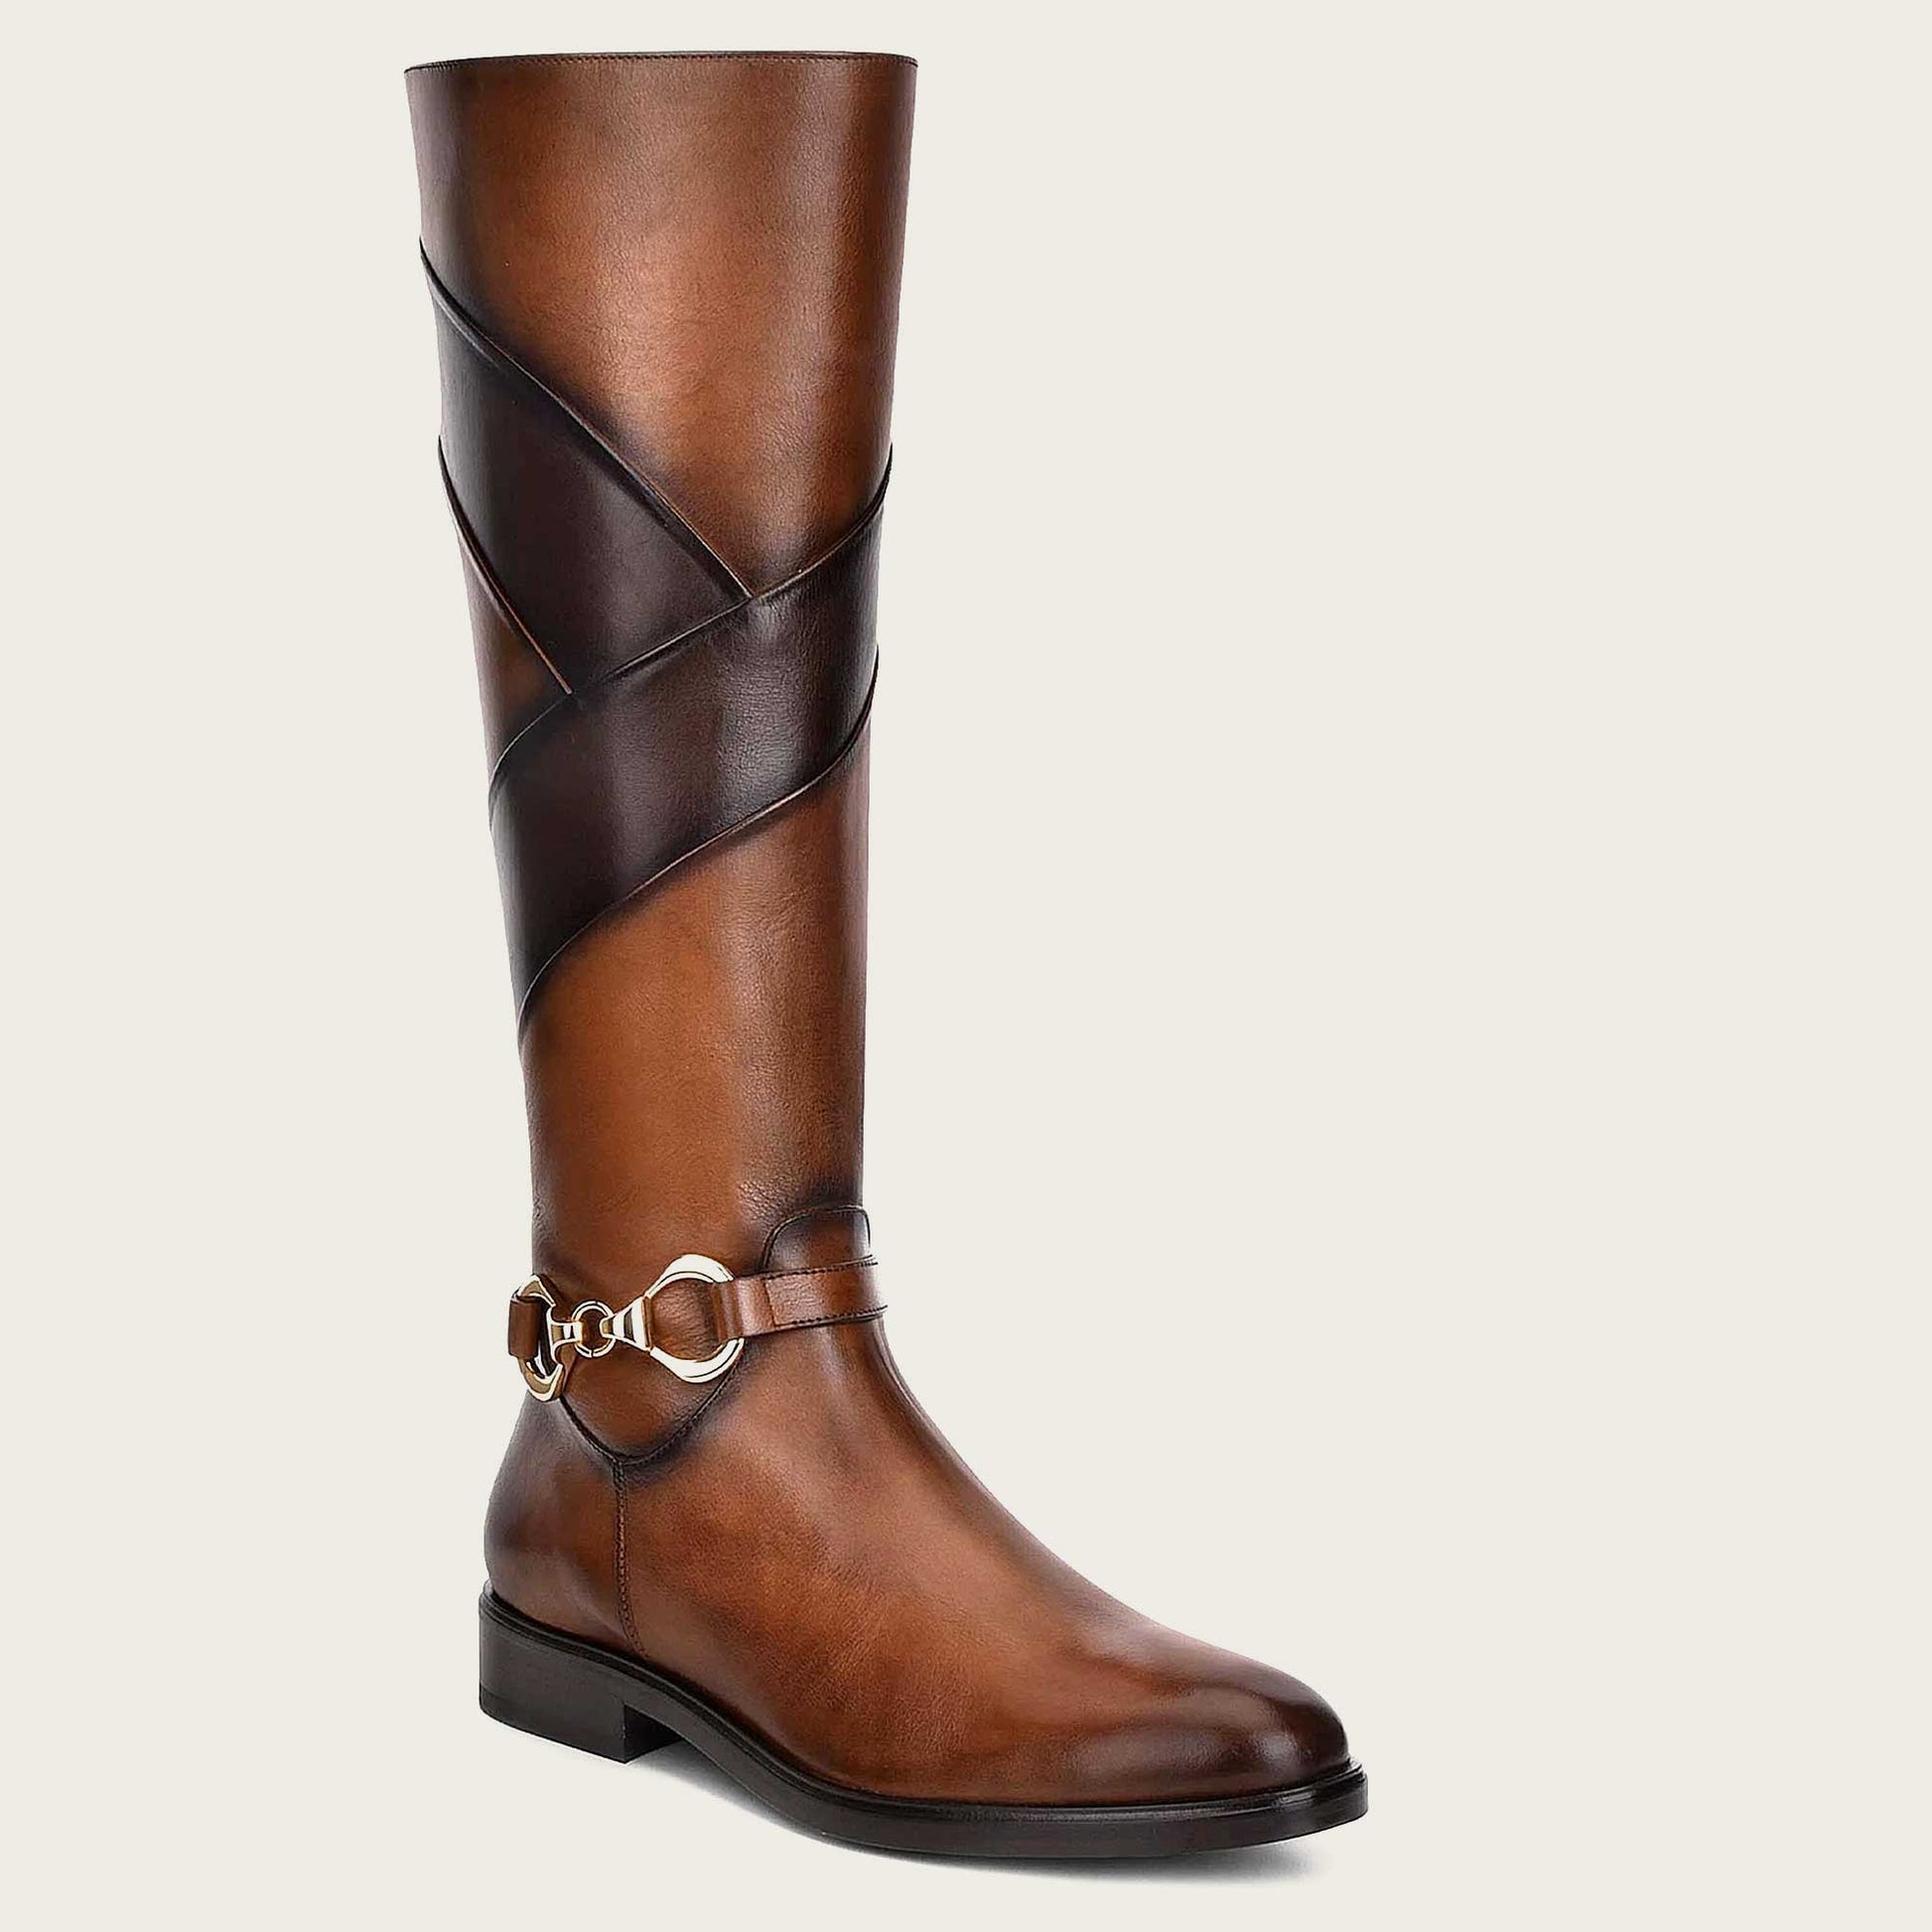 Hand-painted honey leather riding boot with contrasting colors and fine metallic detailing.